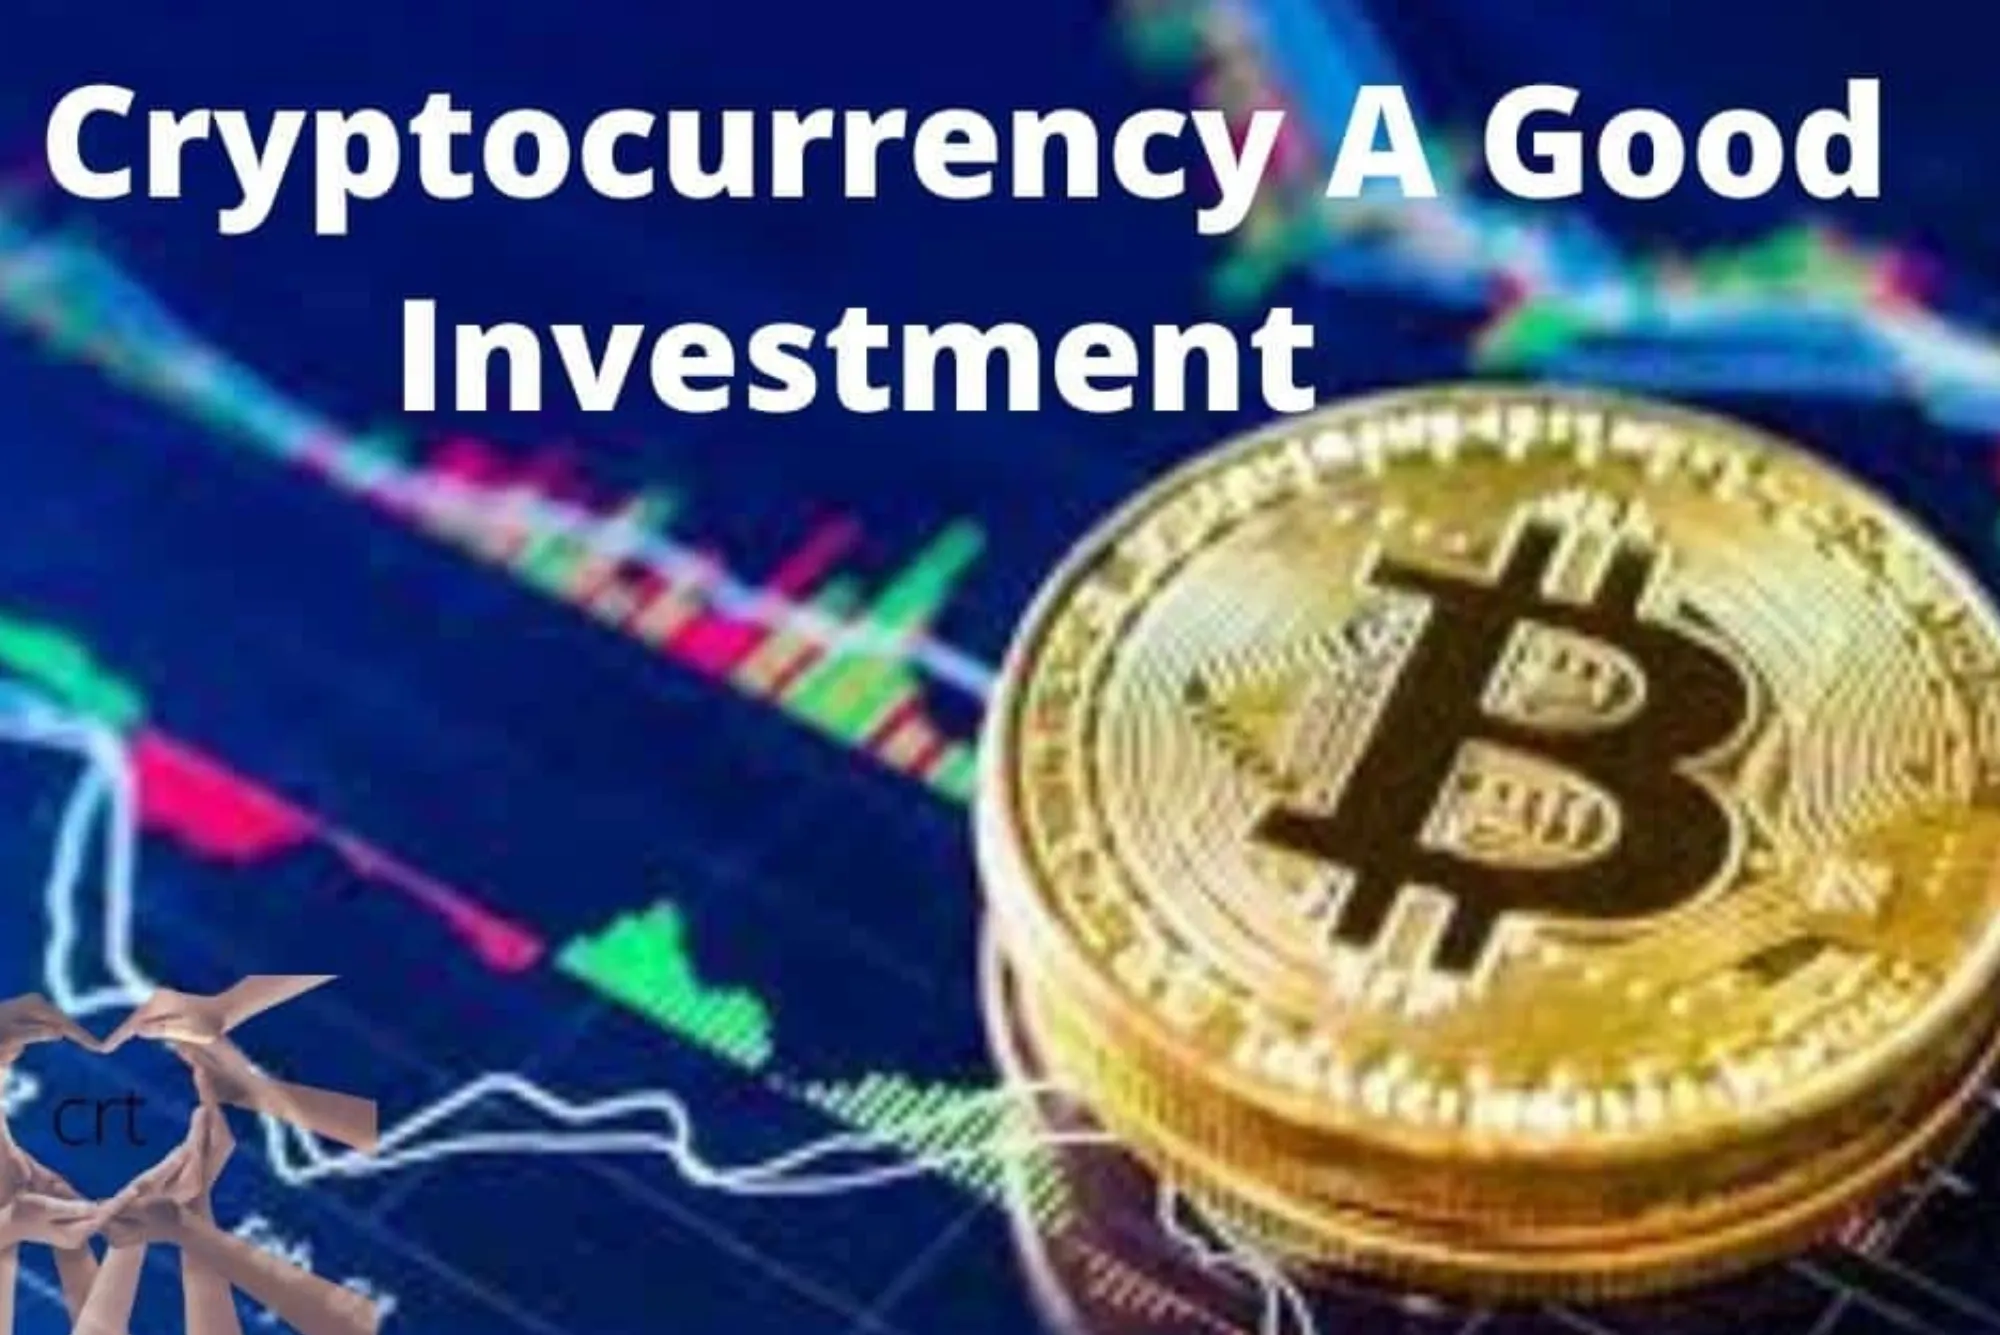 Cryptocurrencies A Good Investment